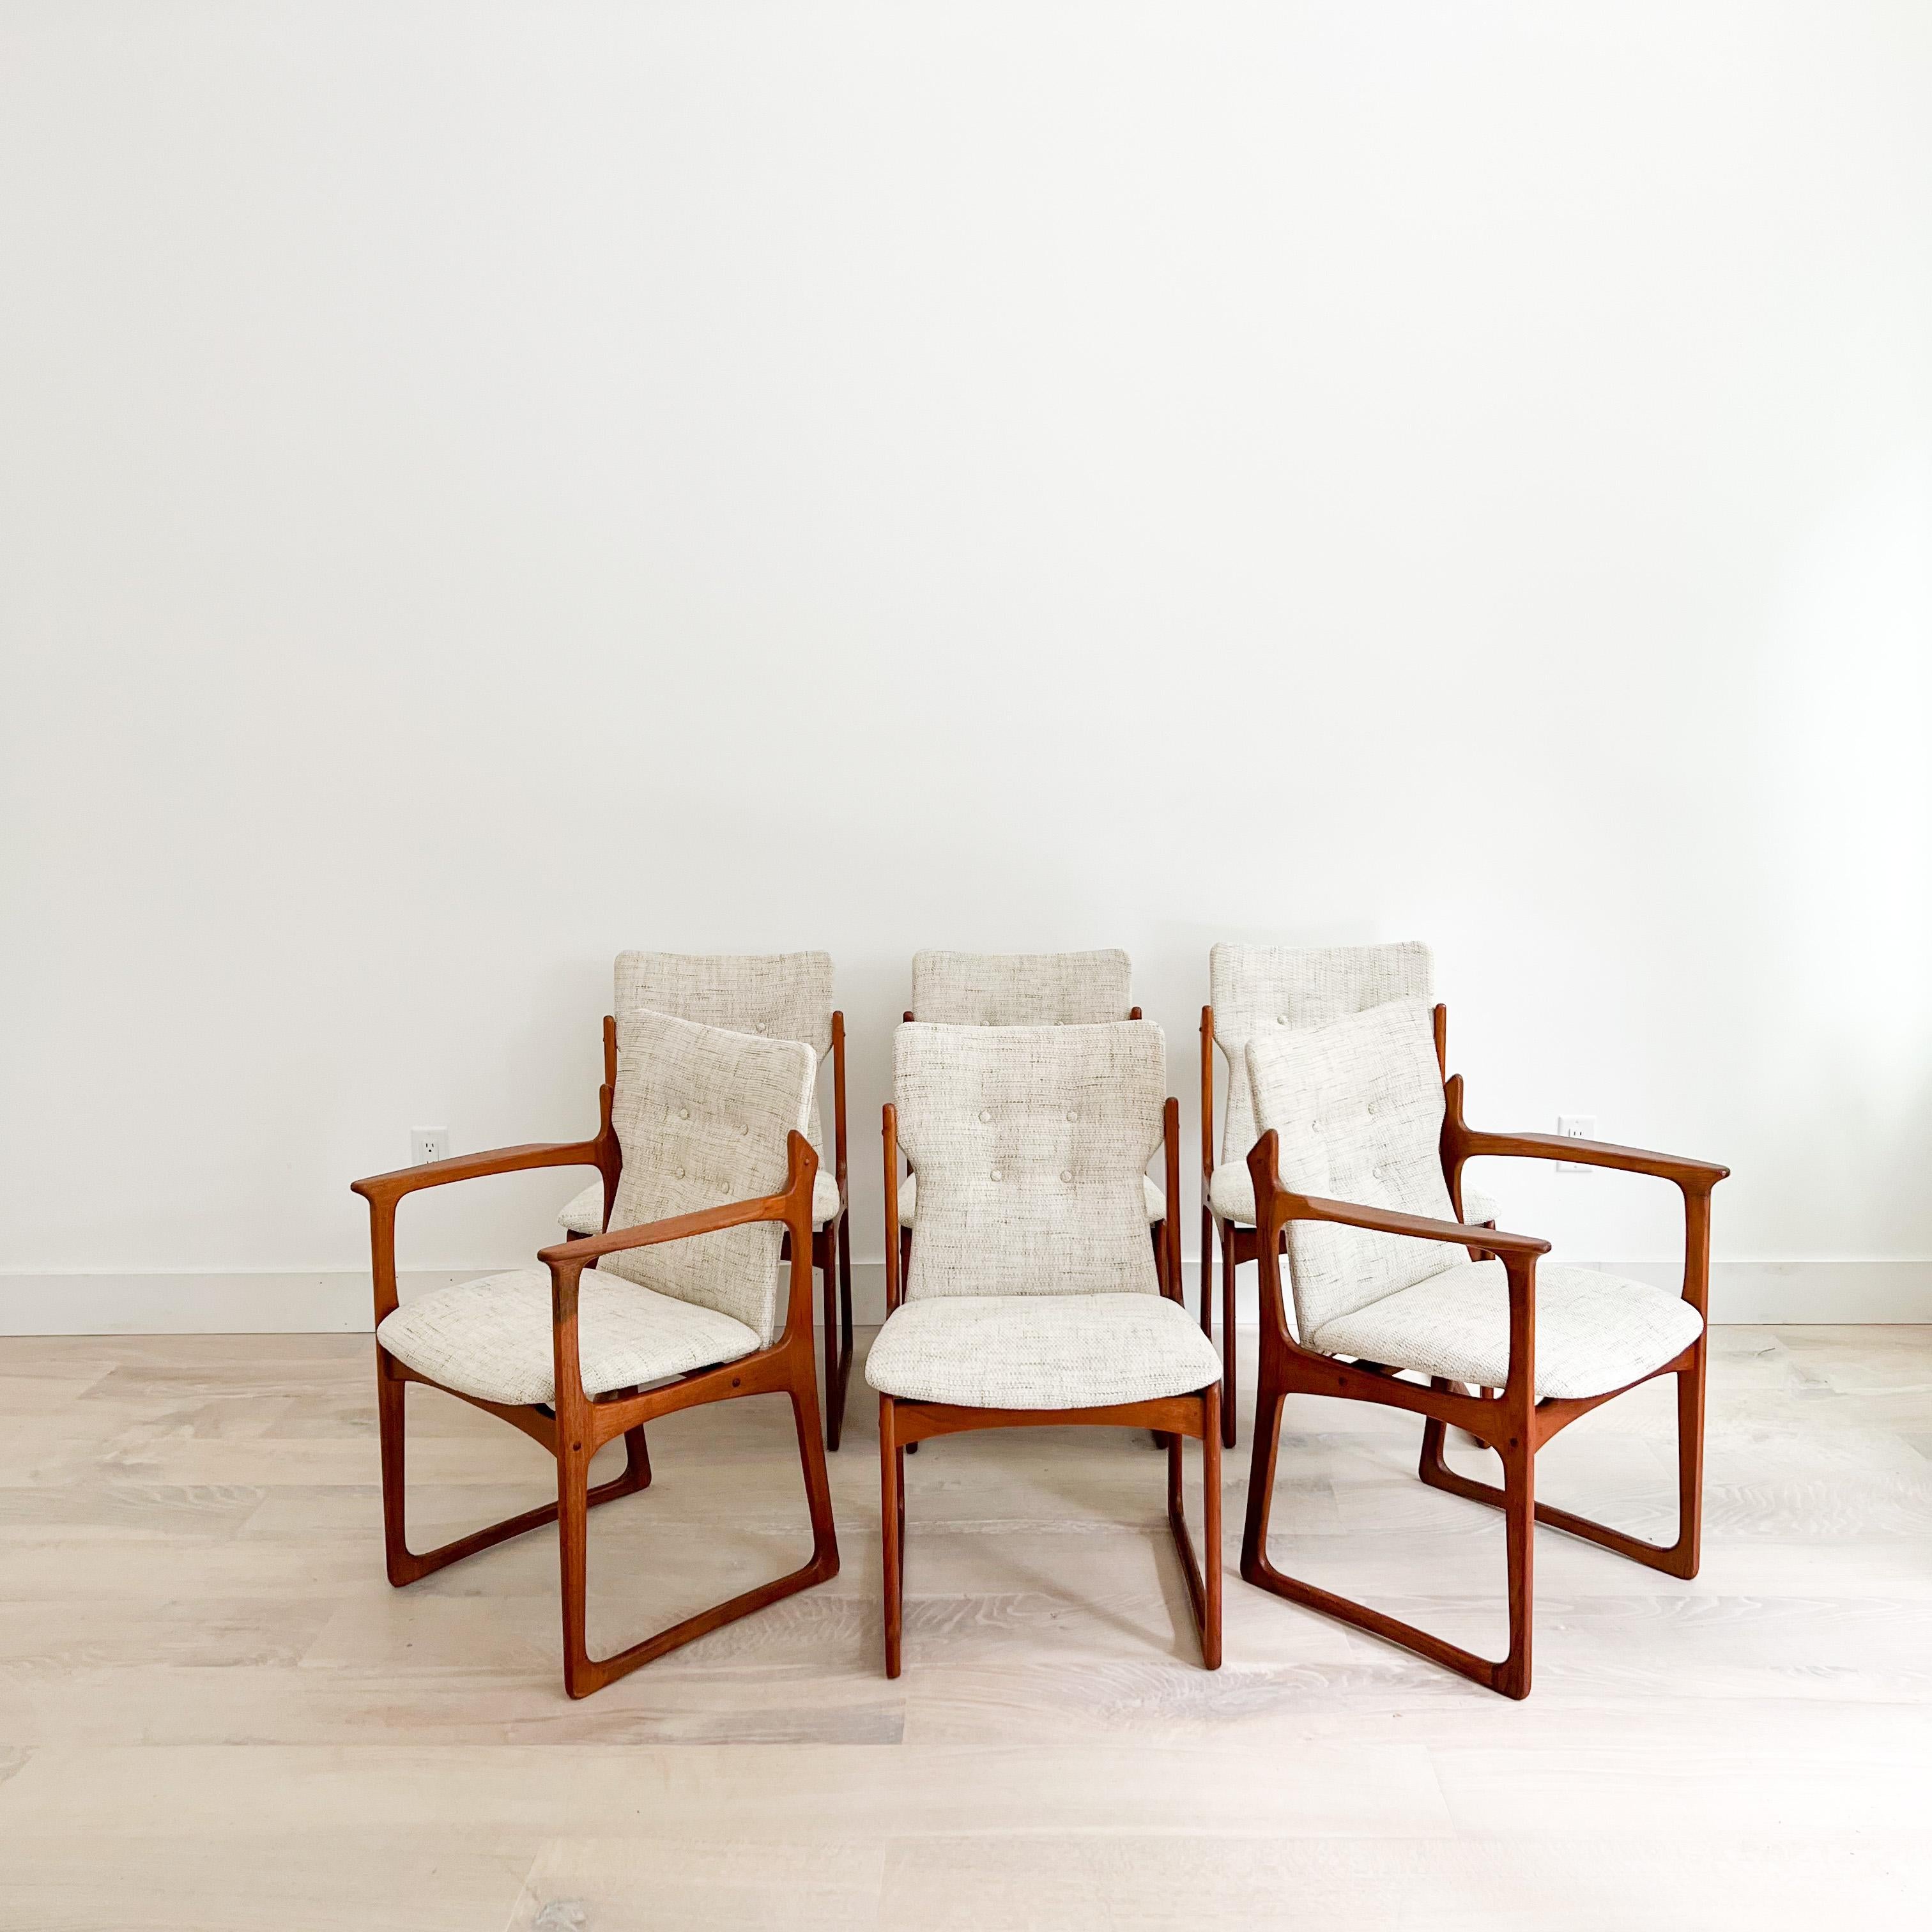 Set of 6 Mid-Century Modern teak dining chairs by Art Furn of Denmark. All new white tweed upholstery with stripes of black and grey. Some light scuffing/scratching to the teak frames from age appropriate wear.